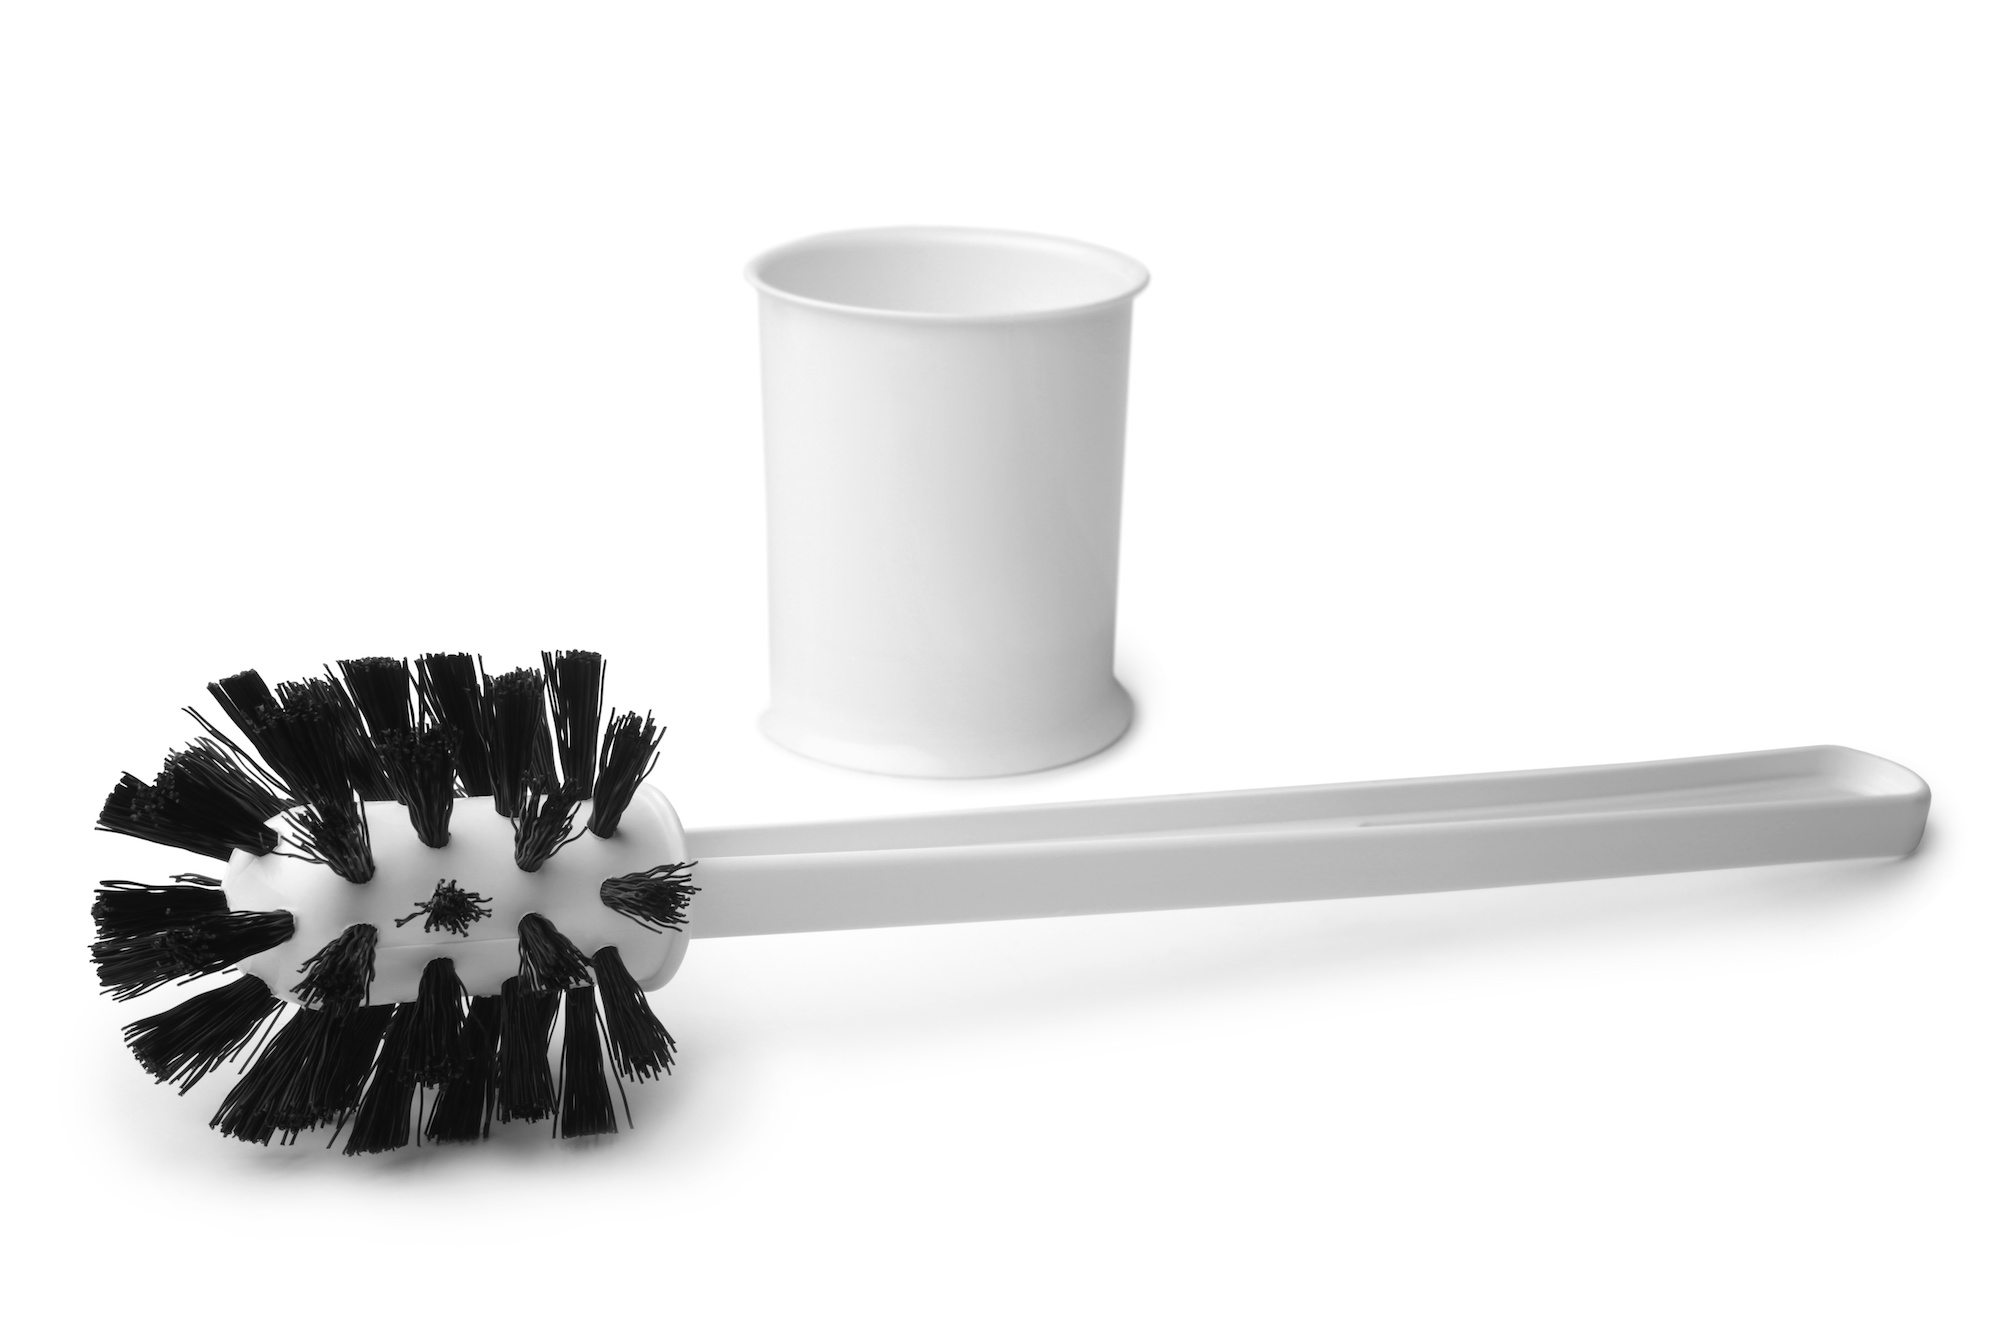 Image of a toilet brush.